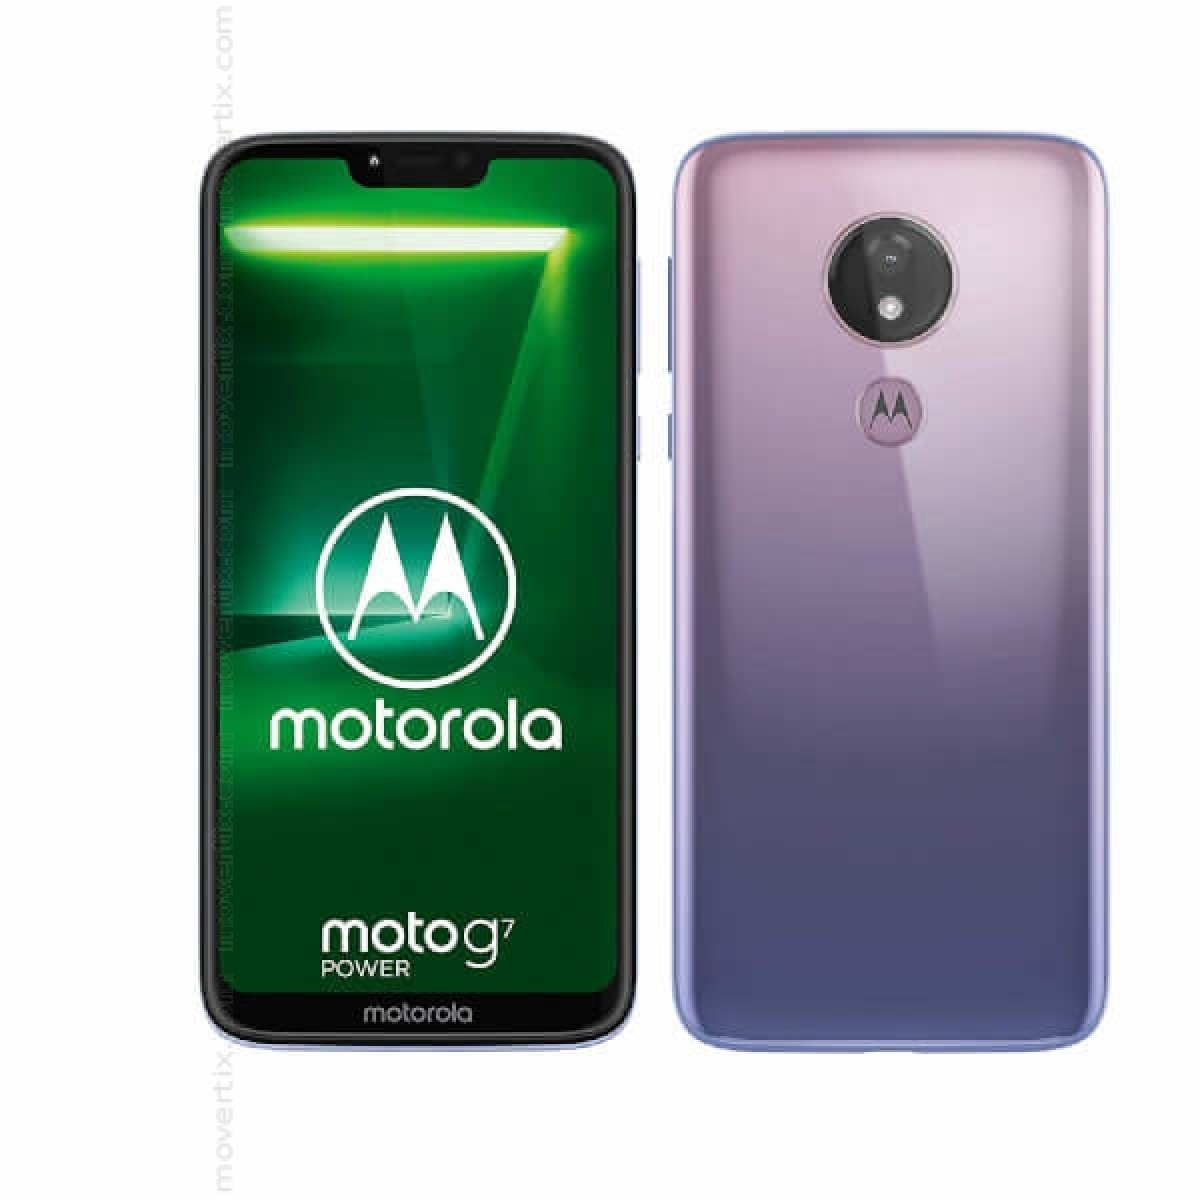 Moto G7 specifications